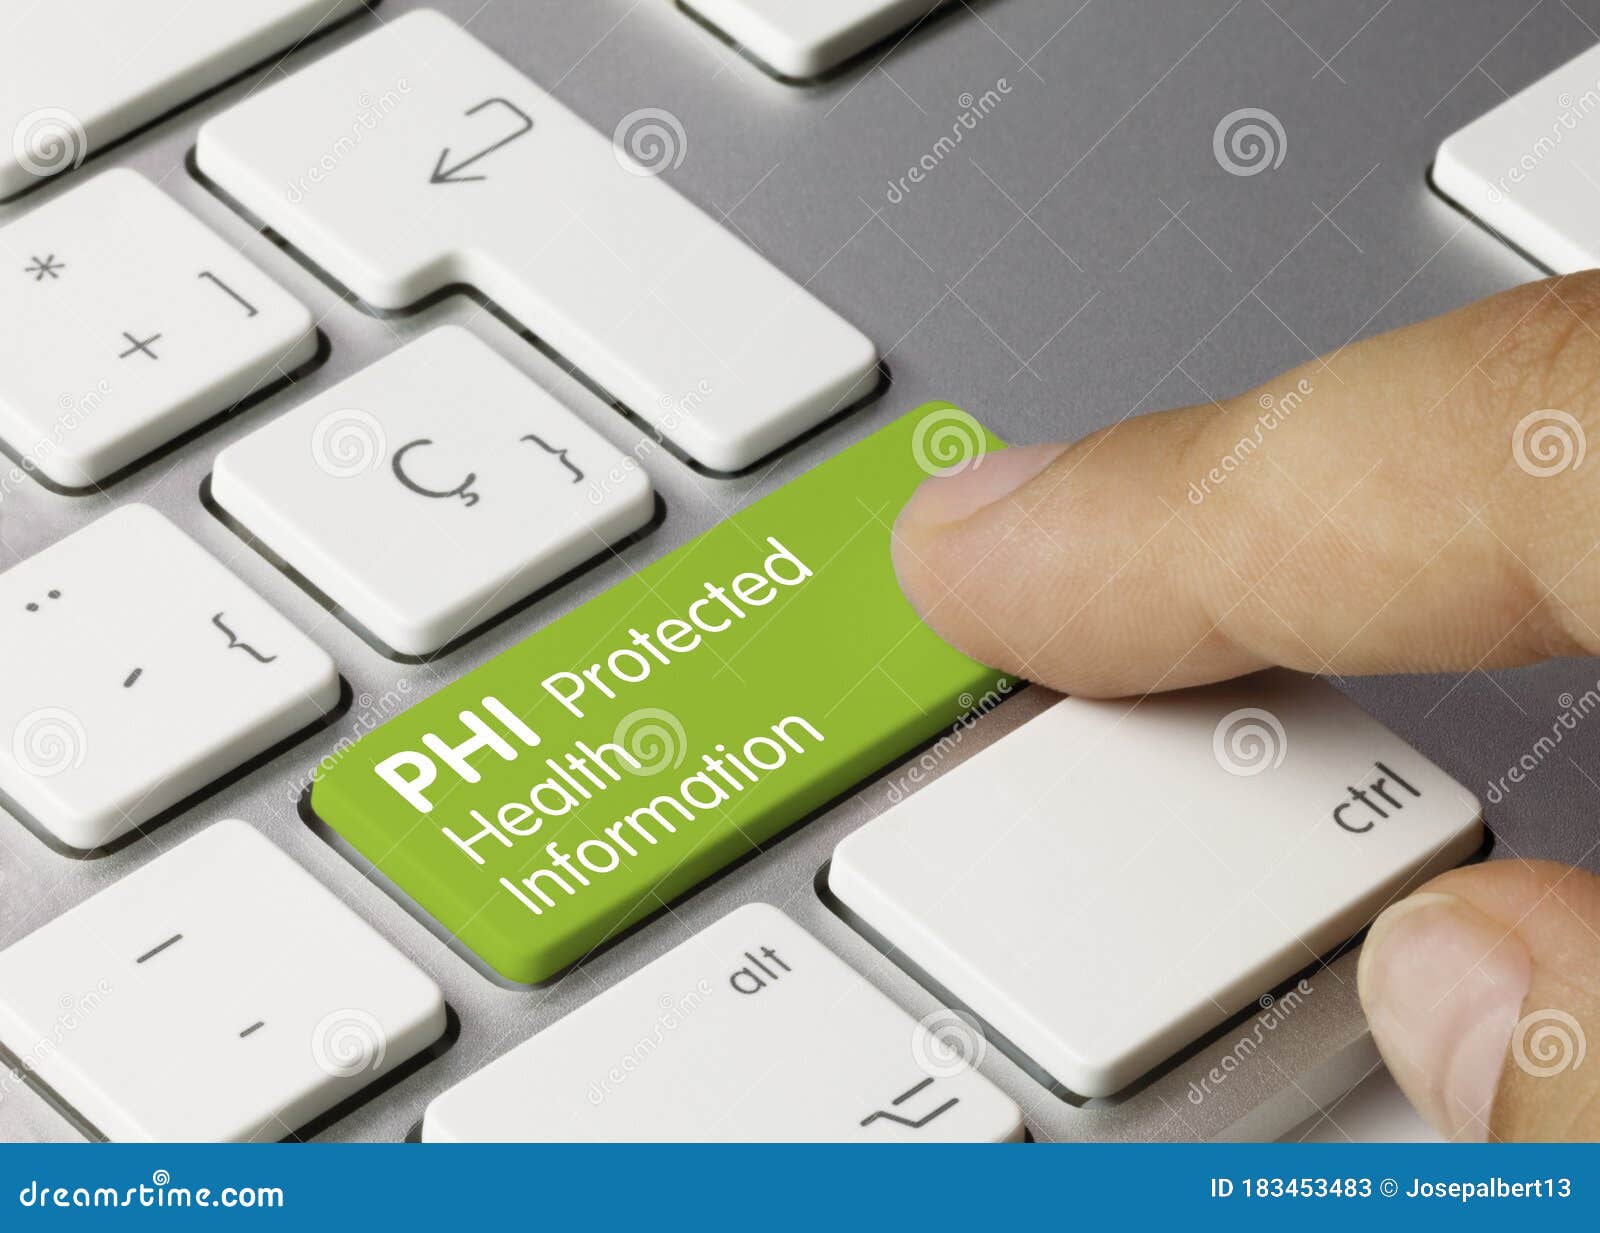 phi protected health information - inscription on green keyboard key